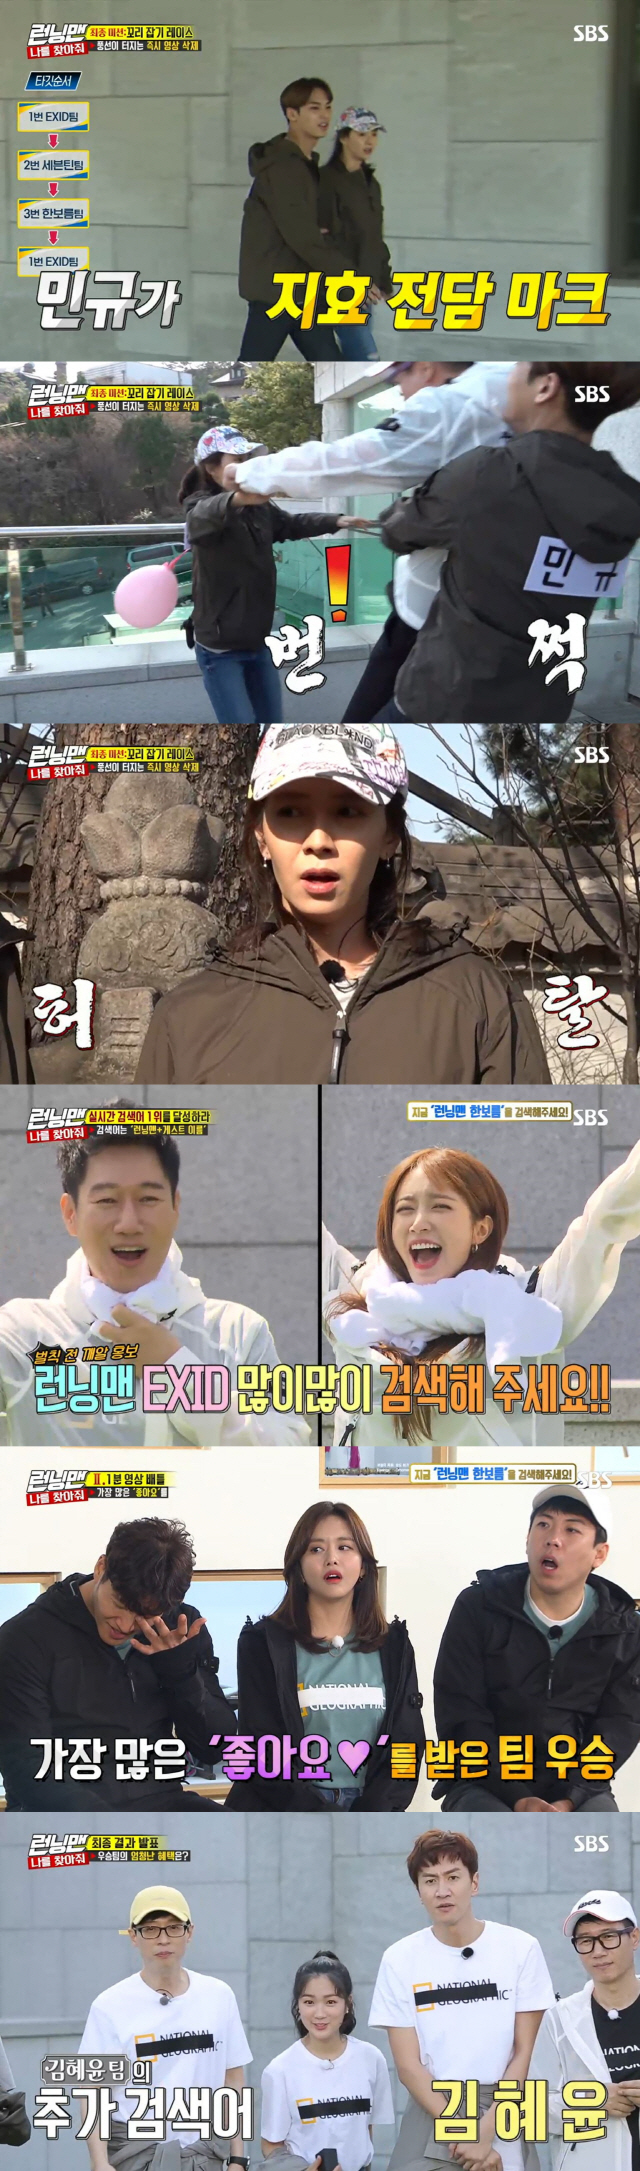 Seventeen Mingyu and Ace Song Ji-hyo became Running Man and Best 1 minute protagonist.According to Nielsen Korea, the ratings agency, SBS Running Man, which was broadcast on the 21st, soared to 7.1% of the highest audience rating per minute (based on the audience rating of households in the metropolitan area), and 2049 target audience rating, an important indicator of major advertising officials, ranked first in the same time zone with 4% (based on two viewer ratings).On this day, Seventeens victory and Mingyu, EXIDs Hani and Solji, actor Kim Hye-yoon, and actor Han Bo-reum appeared as guests and played the first real-time search word war.Seventeen teamed up with Song Ji-hyo and Jeon So-min, Kim Hye-yoon teamed up with Yoo Jae-Suk and Kwangsoo, and Han Bo-reum teamed up with Kim Jong-kook and Yang Se-chan.EXID was in a boat with Ji Suk-jin and Haha; they had to go through three rounds in total to achieve the top spot in real-time search terms before starting the game that won.The first round was The Top Chart of the Year: Game, which hits the top of the popular song chart from 1993 to 2018, will be baptized by water bombs for the last team.Kim Hye-yoon went on a quiz with his dance skills hidden to avoid water bombs.However, Yoo Jae-Suk and Kwangsoo laughed at Kim Hye-yoon, saying, I should not have talked if I could not, and I thought I was doing well.At the end of the battle, the Han Bo-reum team became the winner of the Chats of those days and benefited from the Running Man Han Bo-reum phrase at the top of the screen.The second team was the Seventeen team, the third team was the Kim Hye-yoon team, and the water cannon penalty went to the last EXID team.The second round was a battle in which the team that produced the one-minute promotional video for each team won the most likes on the Running Man official SNS.Kim Hye-yoon team has featured a variety of elements that attract the attention of netizens, from Jennys Solo choreography to the Sky CastleThe EXID team produced a direct-cam video featuring choreography and reversal fun tailored to Hot Pink, and the Seventeen team challenged the Onana dance.The Han Bo-reum team used Kim Jong-kooks golden connections to capture the instant phone connections with the best stars from Jackson to Ryu Hyun-jin of GOT7.Finally, the tail-catching race started with the deletion of promotional videos, and the promotional videos posted on the SNS were deleted at the moment the balloon of the tail bursts, and the number of likes counts will be completed.Kim Hye-yoons team was the first to be eliminated by the Han Bo-reum team after the balloon was removed.Song Ji-hyo, left alone, was in Danger where the balloon would burst with the appearance of Ji Suk-jin, but with the help of Seventeen Mingyu, he escaped Danger.However, Haha joined the team and went to catch Song Ji-hyo, and the two teams played front.Mingyu defended Song Ji-hyo by blocking Ji Suk-jin and Haha, but Song Ji-hyos balloon was caught in the branches and was dropped.The scene had the highest audience rating of 7.1% per minute, accounting for the best one minute.The final winner of the tail-catching race was won by the Han Bo-reum team.However, Kim Hye-yoons team, which was the first to be deleted by the first elimination of the tail, won the highest number of likes of 2306.The winning Kim Hye-yoon team provided one more search term in addition to Running Man Kim Hye-yoon.The final winner will be determined by counting real-time search terms until midnight.